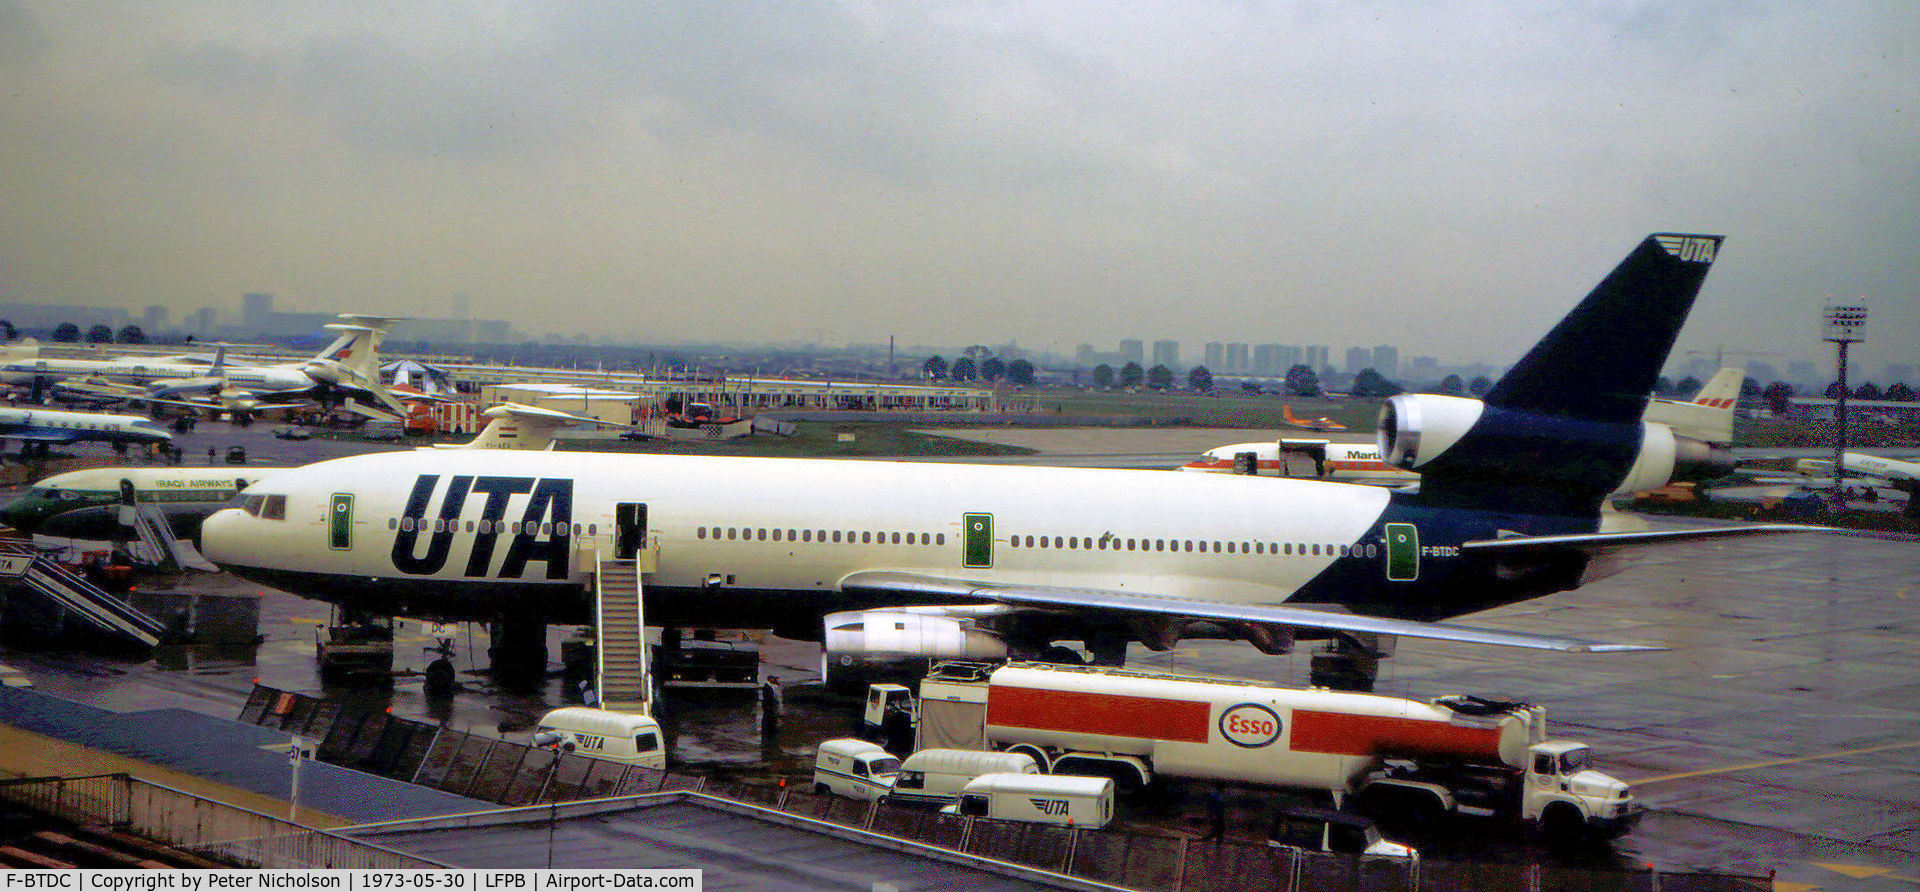 F-BTDC, 1973 Douglas DC-10-30 C/N 46851, DC-10-10 of Union De Transport Aerien as seen at Le Bourget in May 1973.